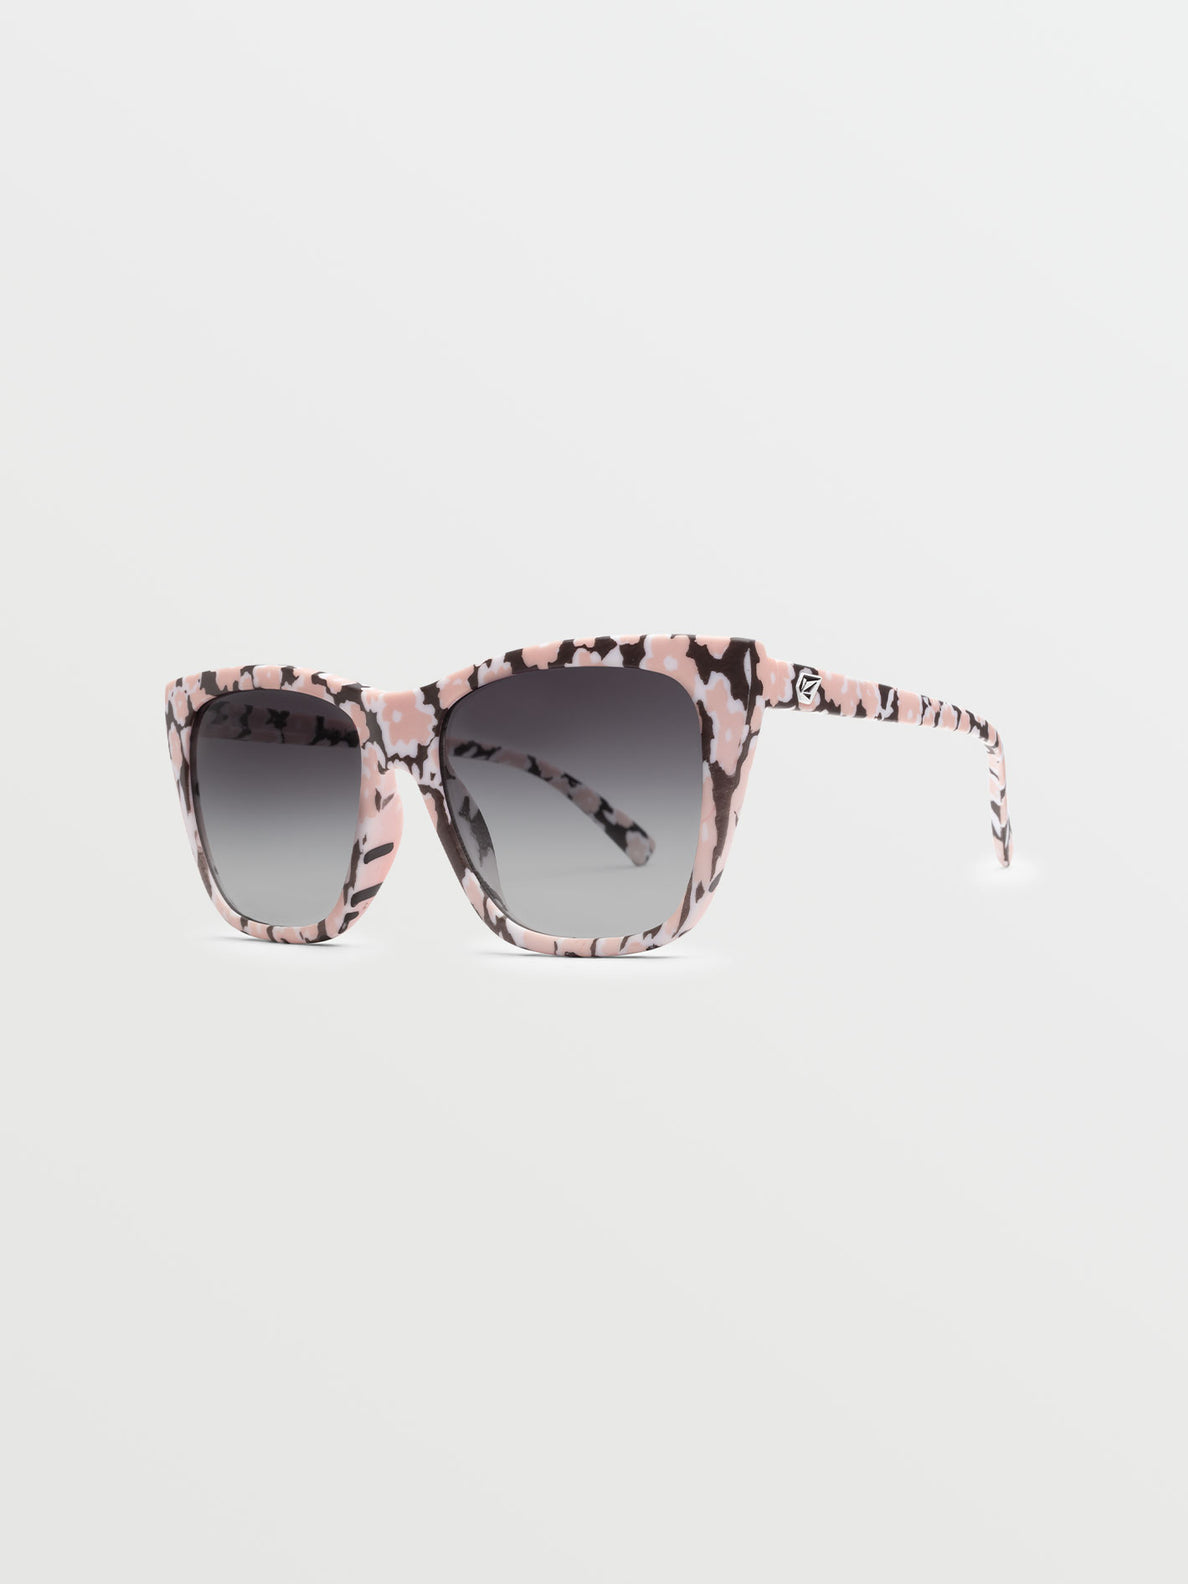 LOOKY LOU SUNGLASSES - WHAT'S POPPIN/GRAY GRADIENT